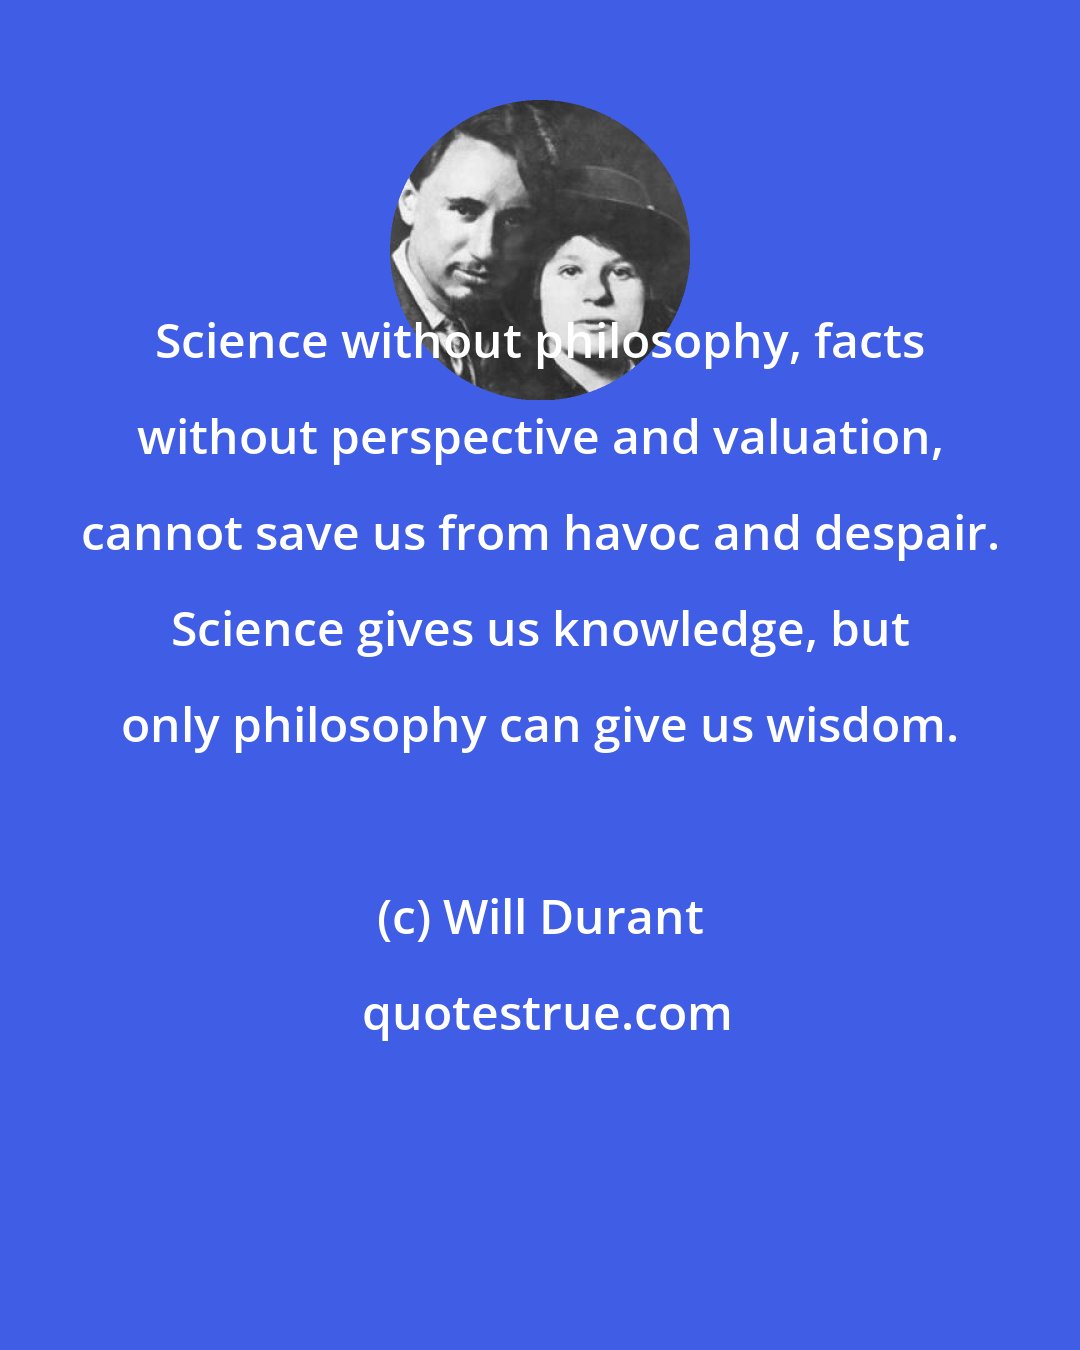 Will Durant: Science without philosophy, facts without perspective and valuation, cannot save us from havoc and despair. Science gives us knowledge, but only philosophy can give us wisdom.